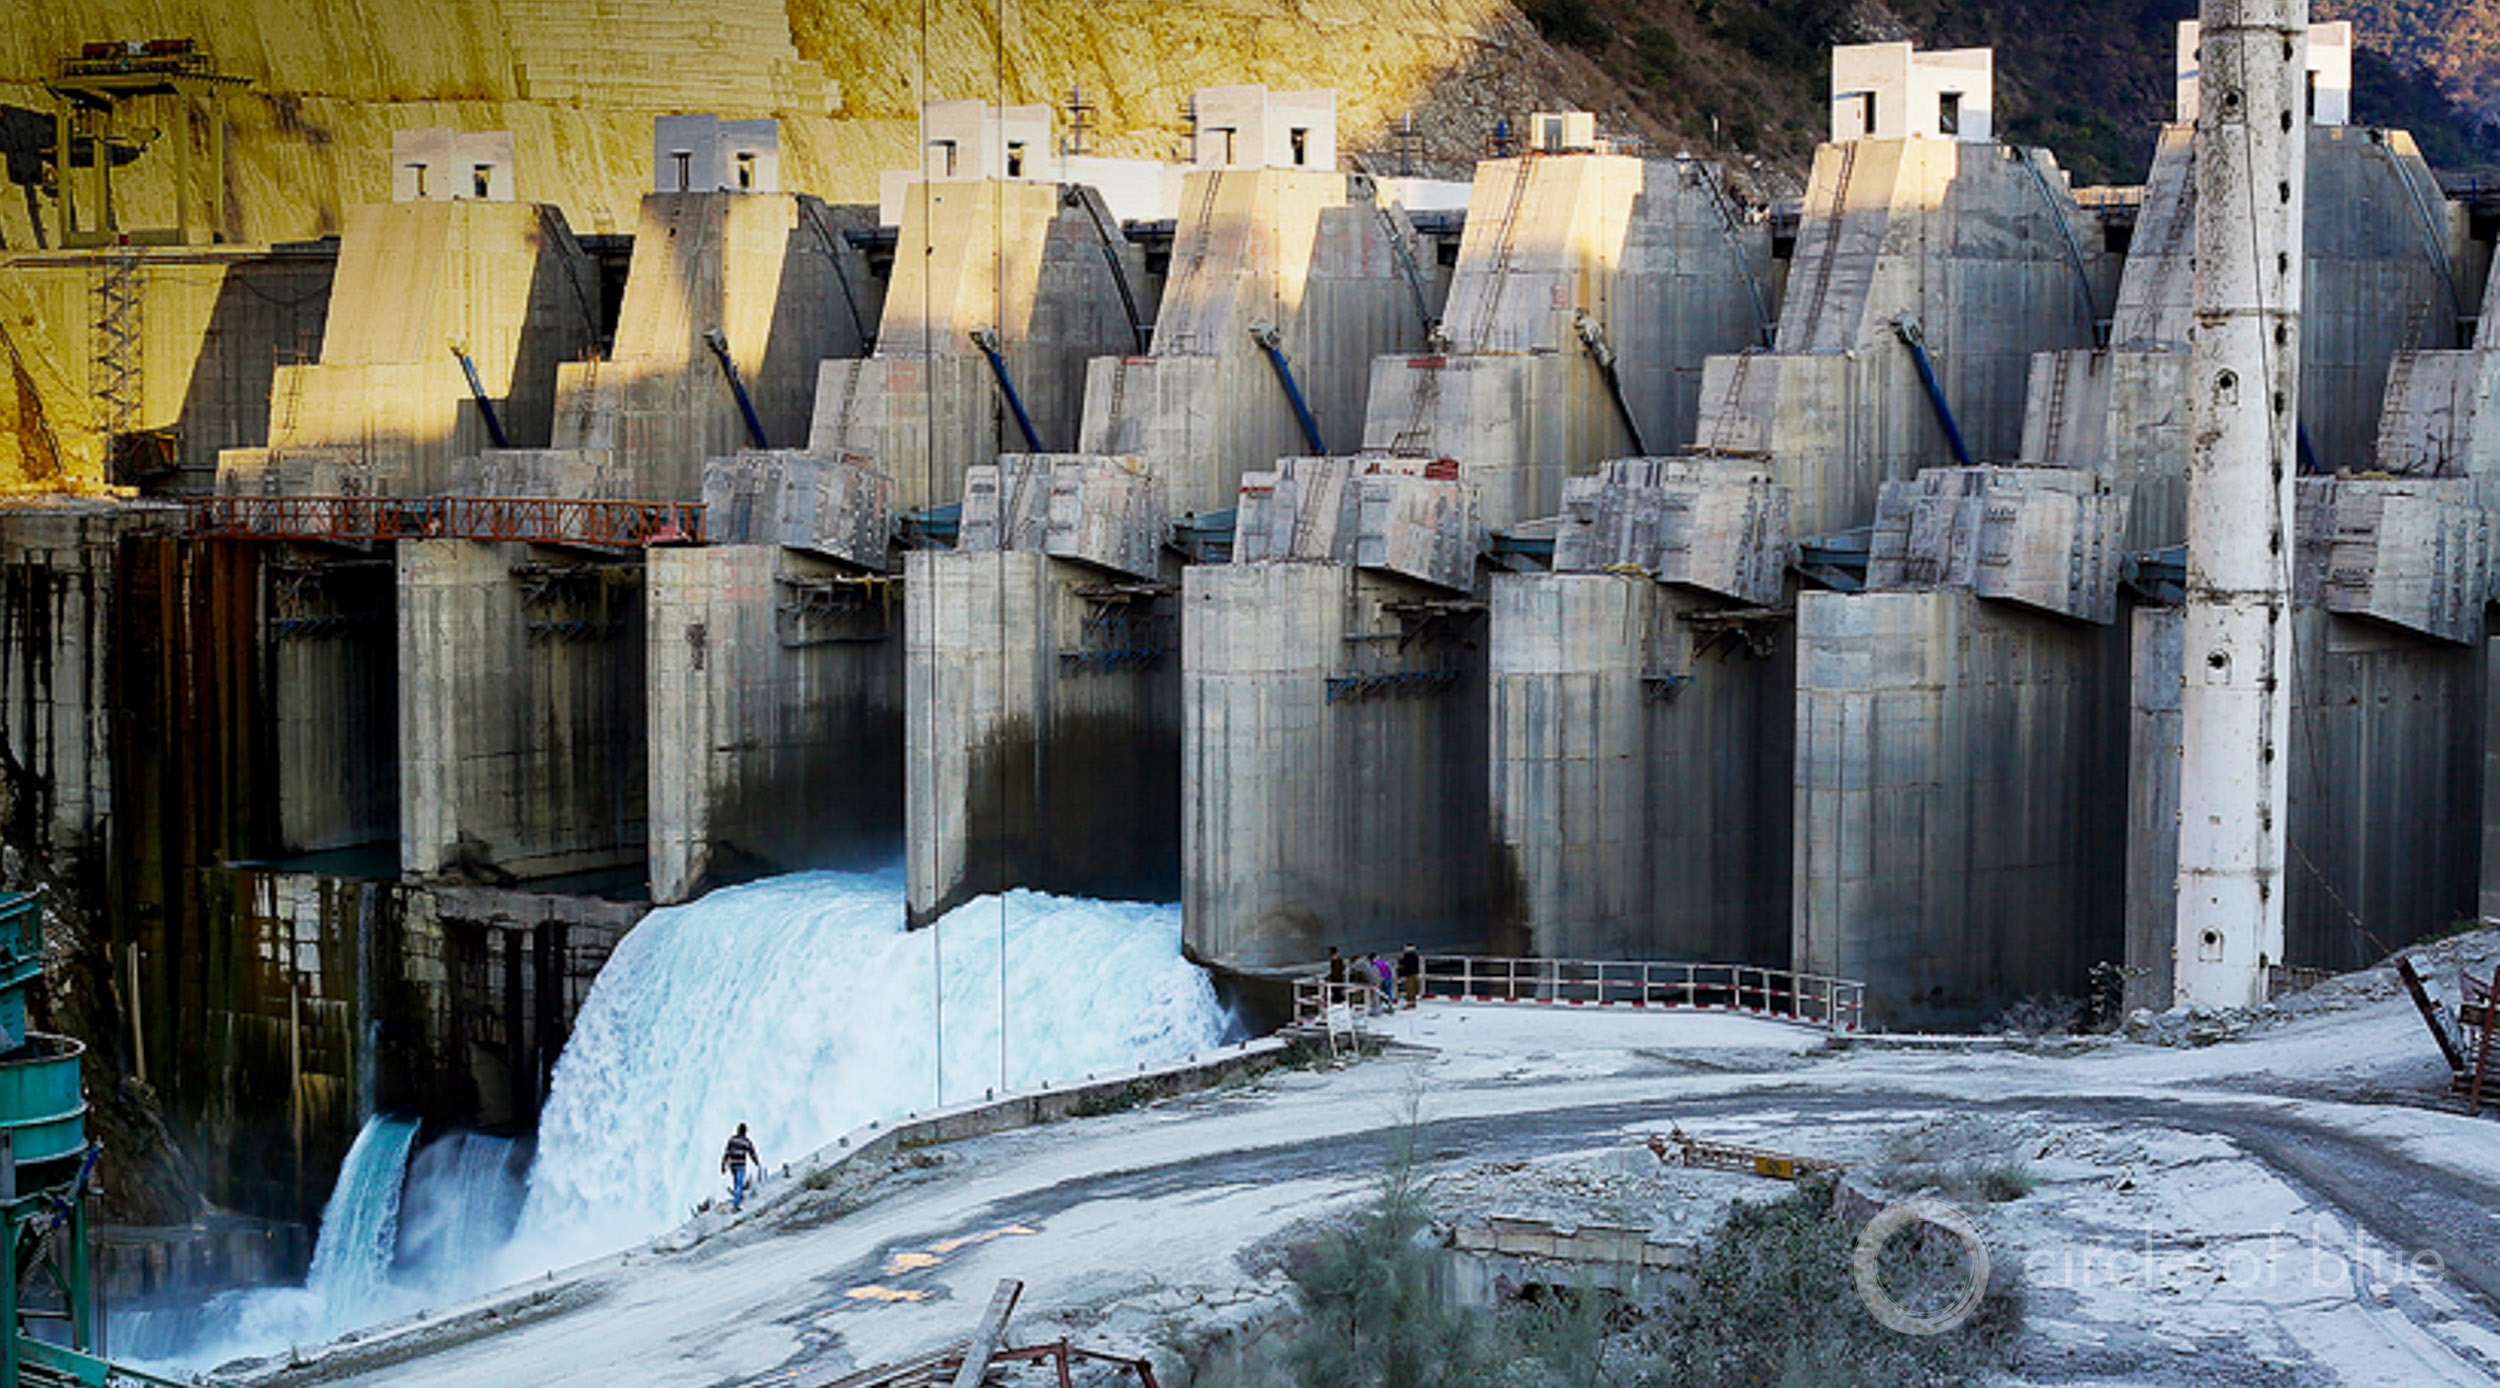 In March 2016 and April 2016, due to severe drought, generation from hydropower projects was 19 percent and 17 percent lower compared to the same months the previous year. Here, a hydropower project in Srinagar, a Himalayan hill city in Uttarakhand. Photo © Durham Malhotra